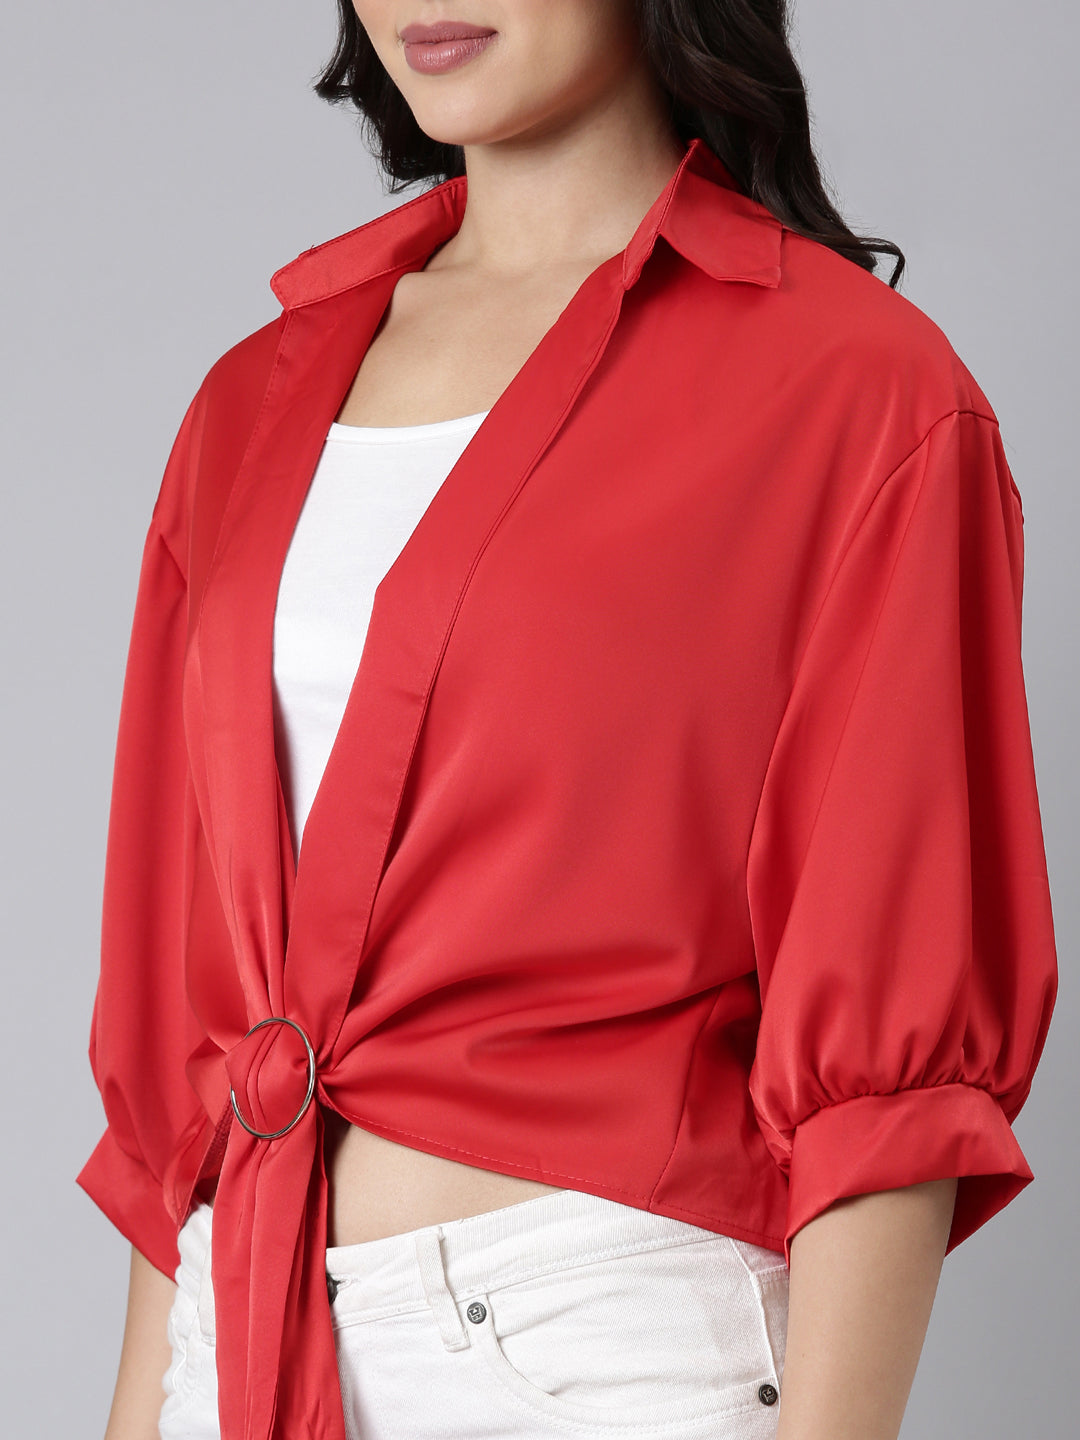 Women Solid Shirt Style Red Top